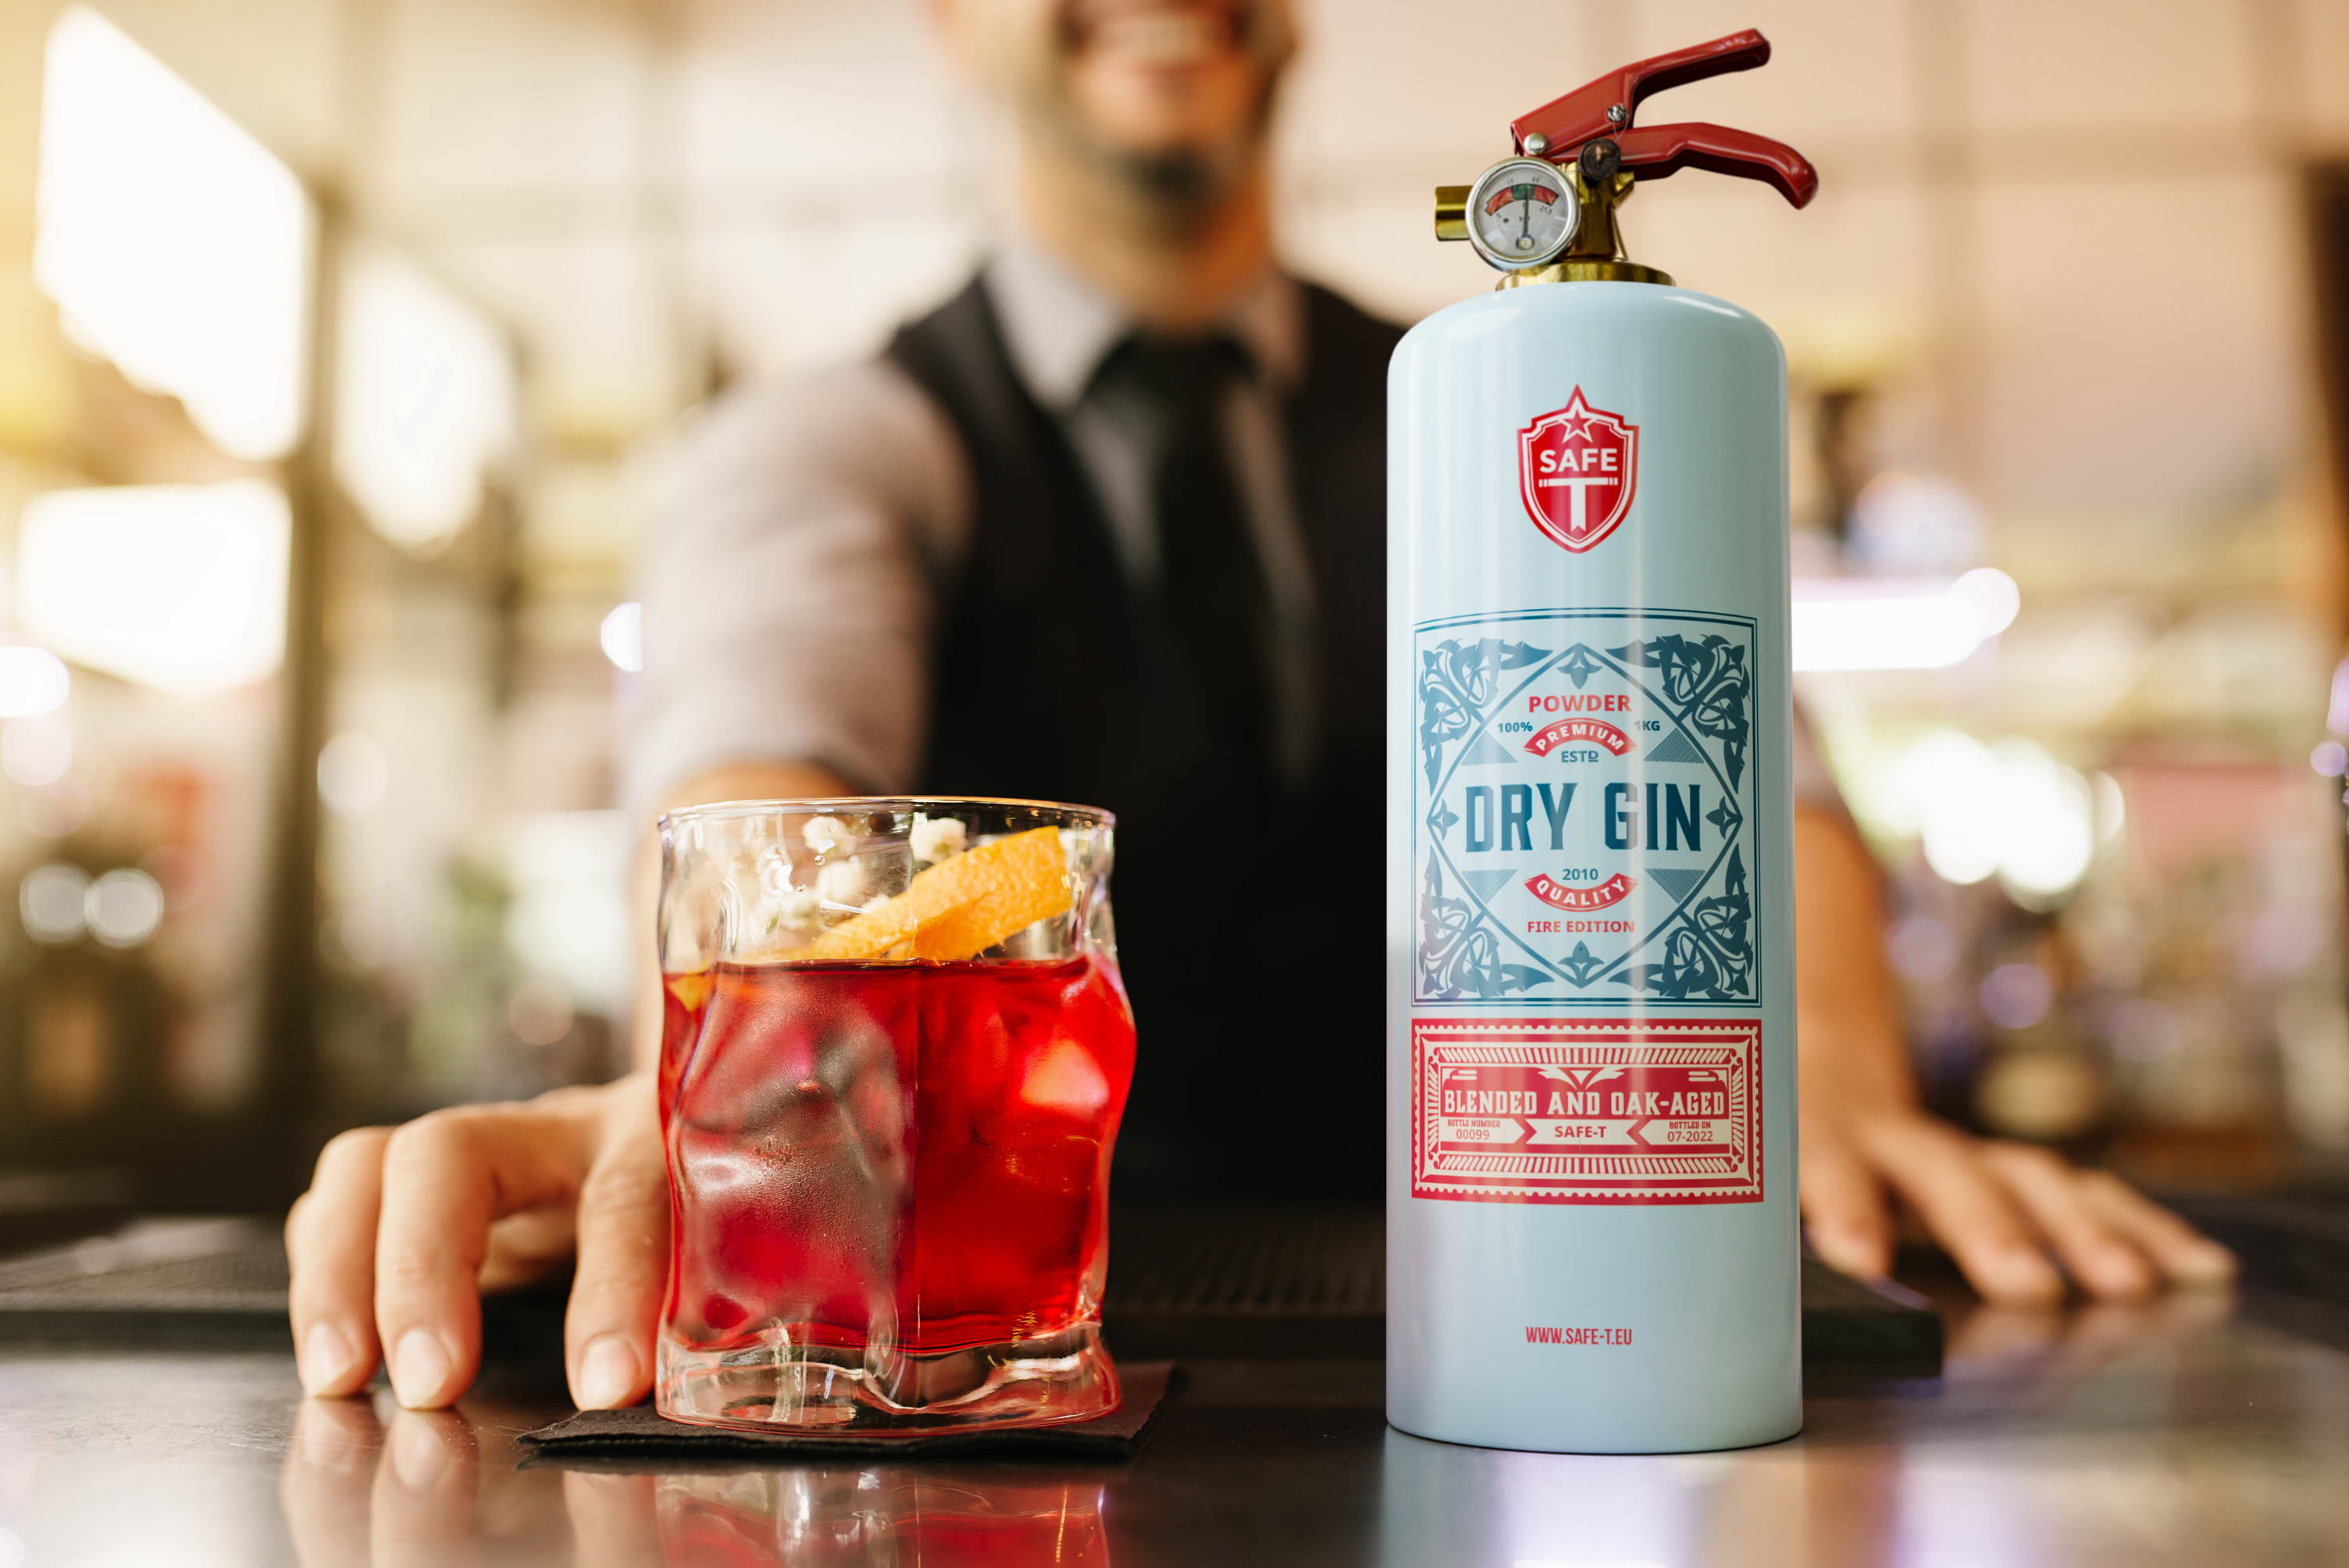 DRY GIN - SAFE-T.US